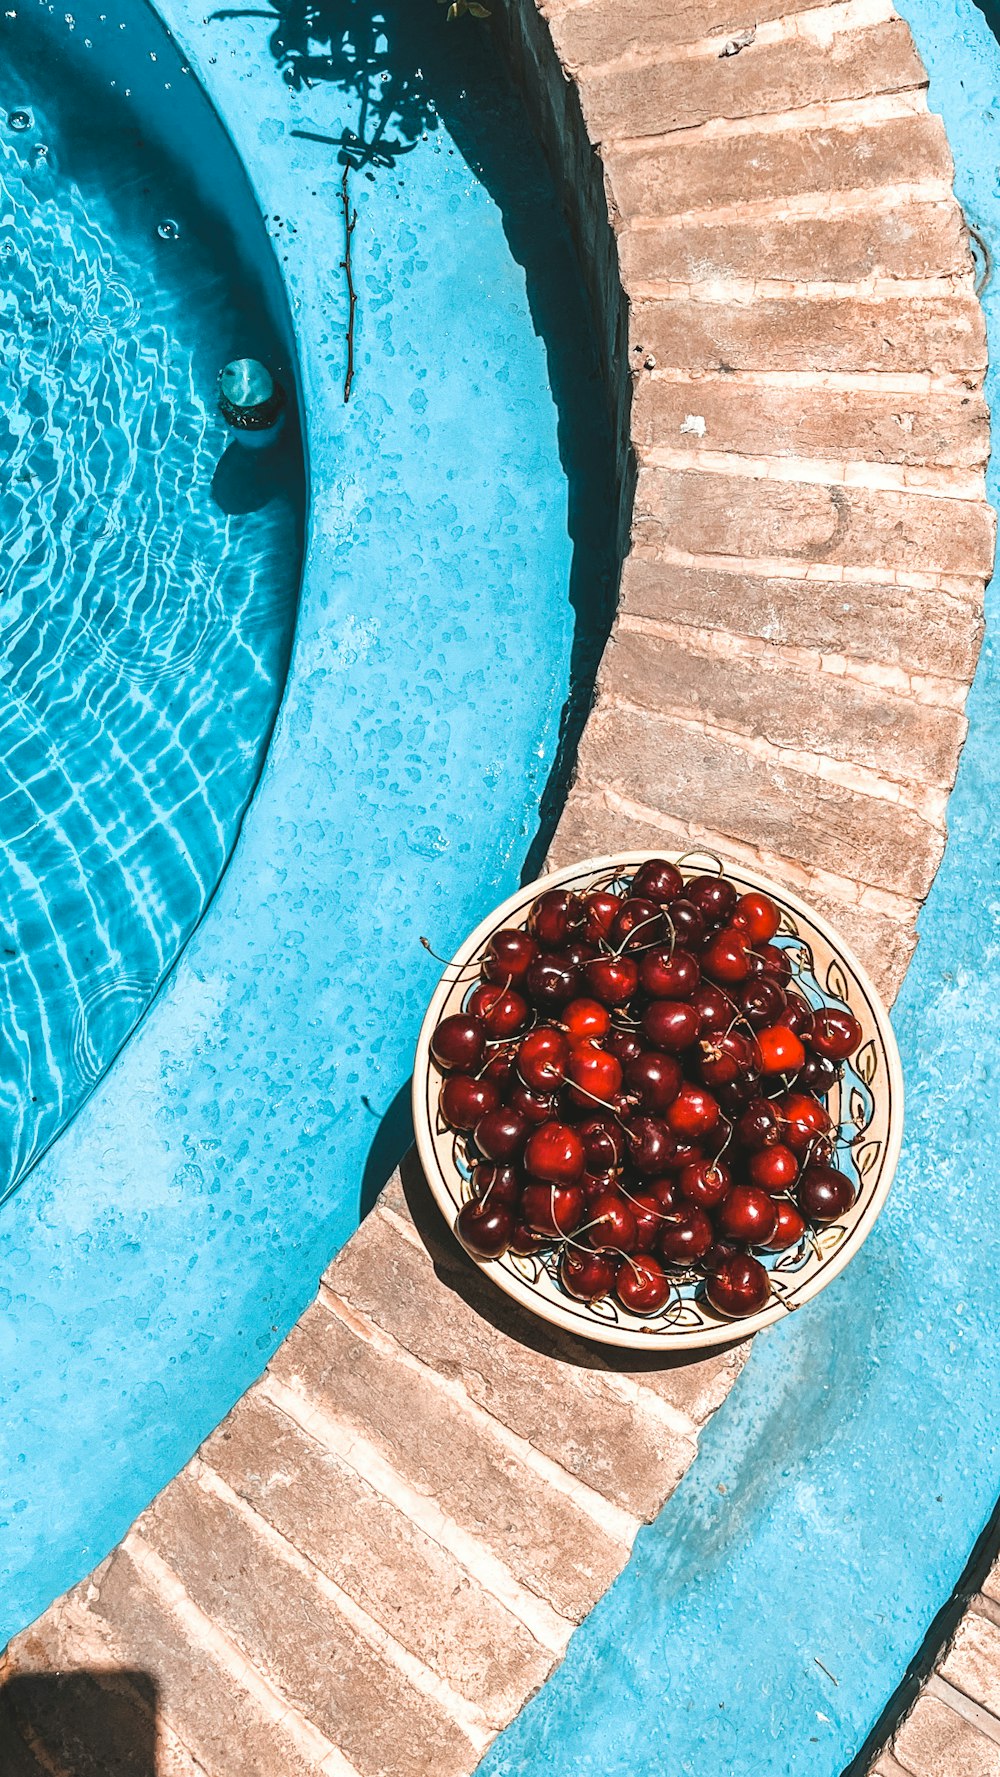 a bowl of berries on a stone surface